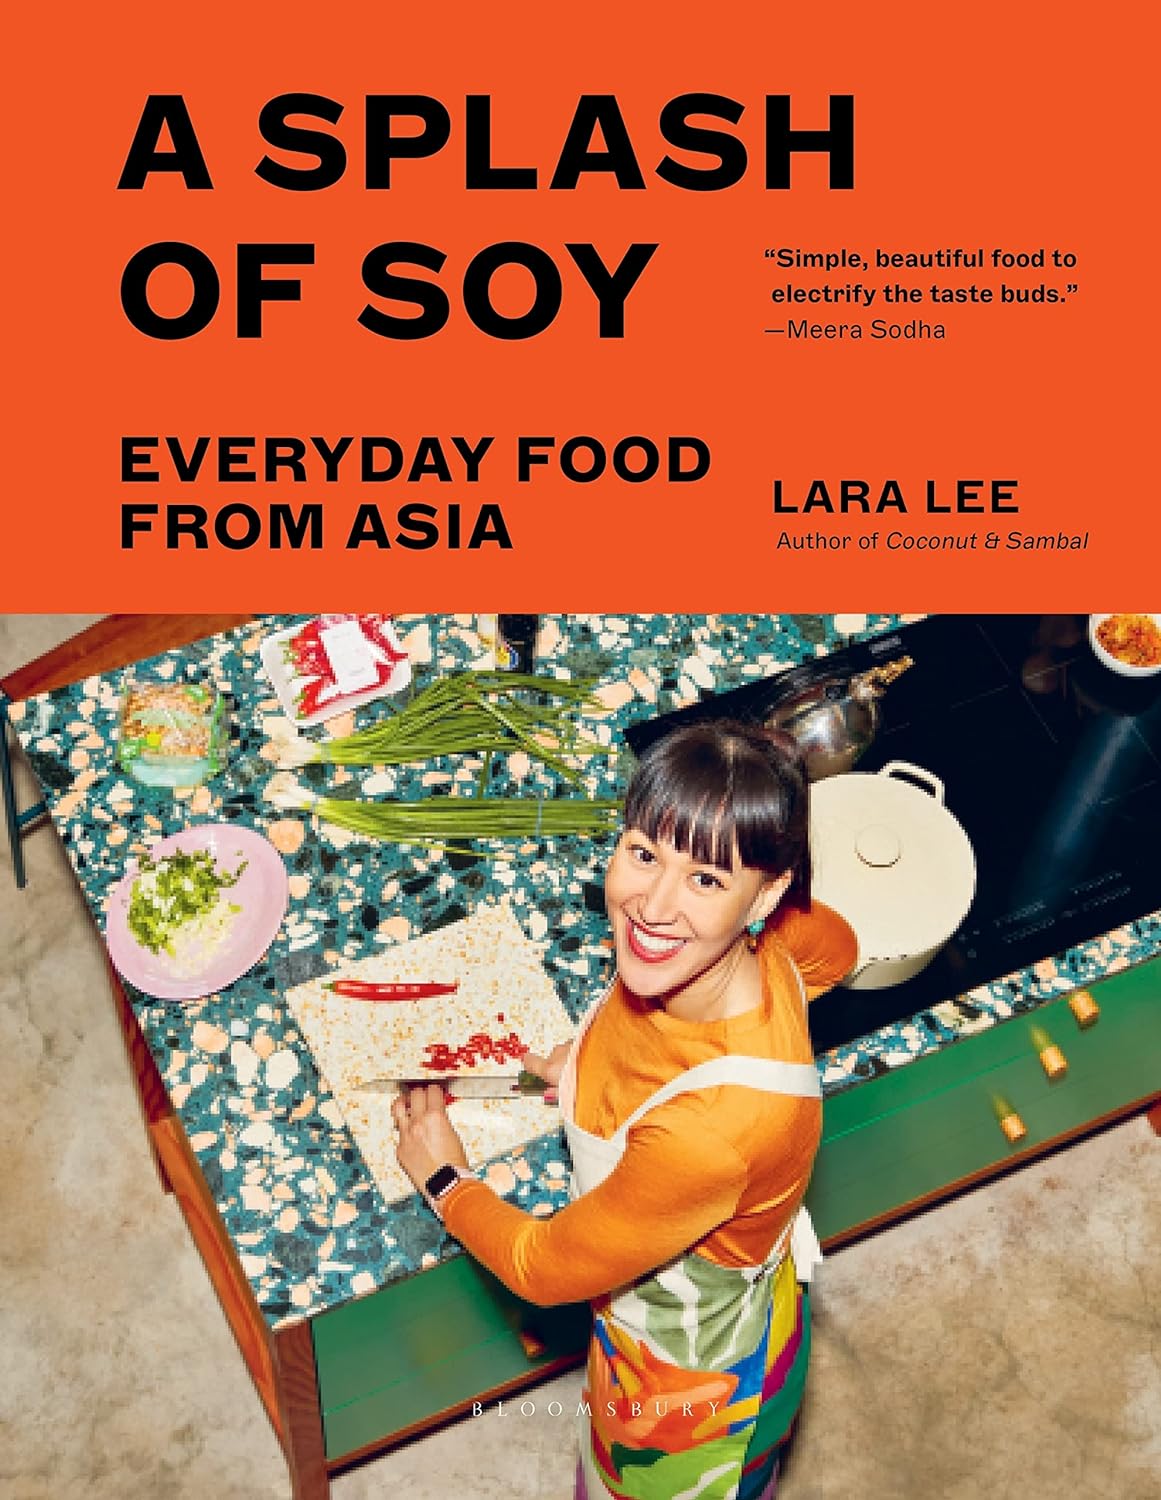 A Splash of Soy: Everyday Food from Asia (Lara Lee)